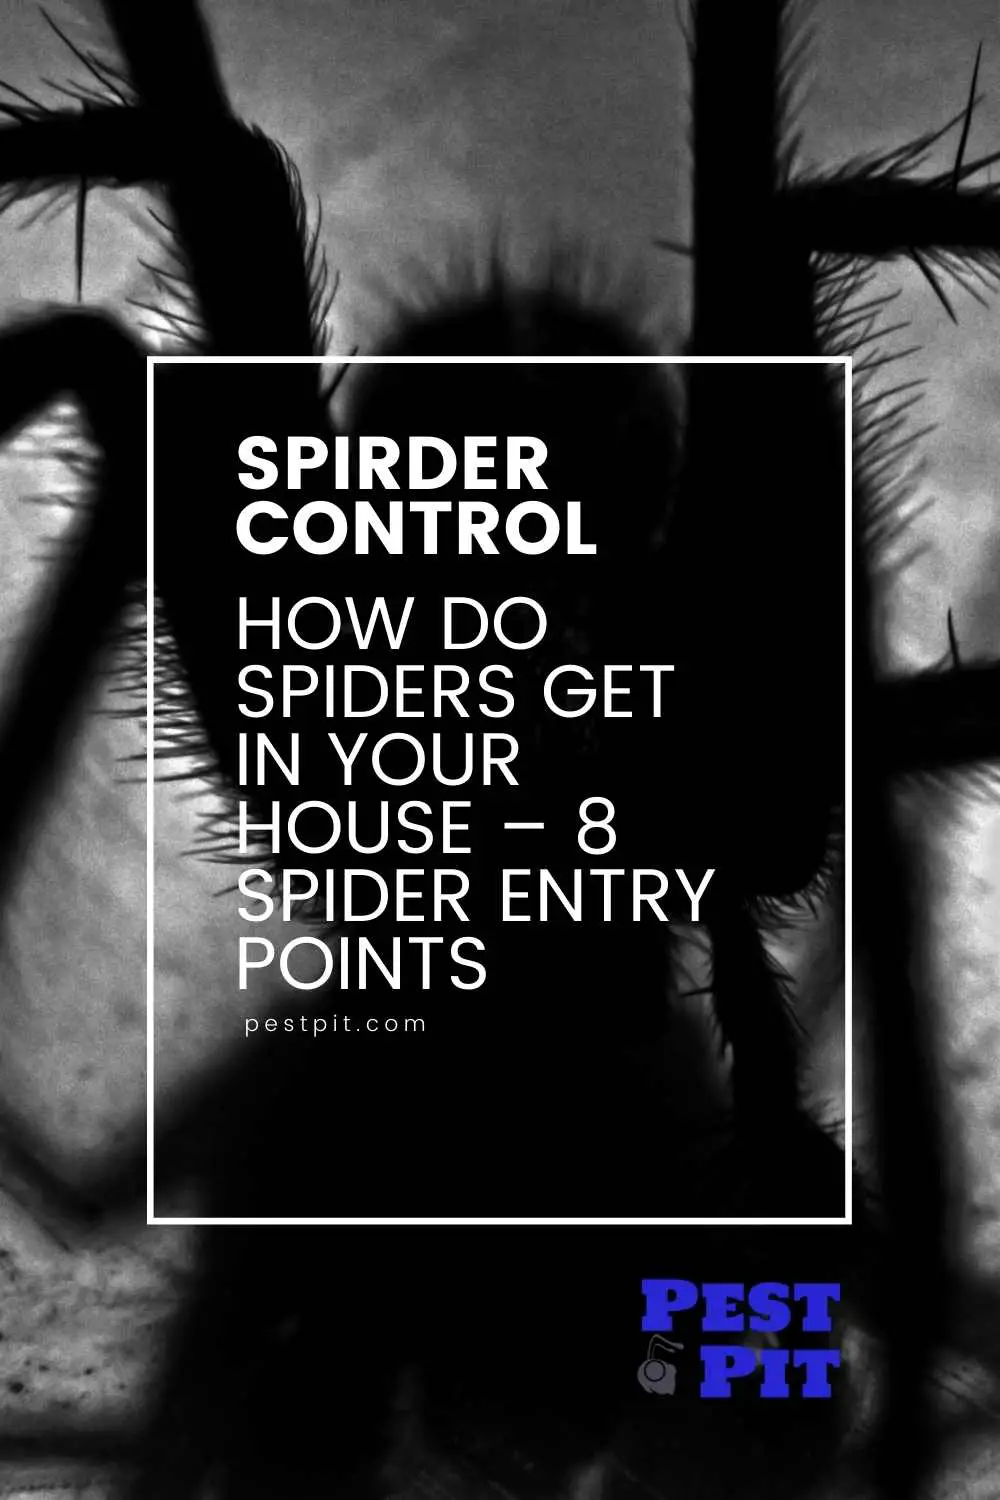 How Do Spiders Get In Your House – 8 Spider Entry Points